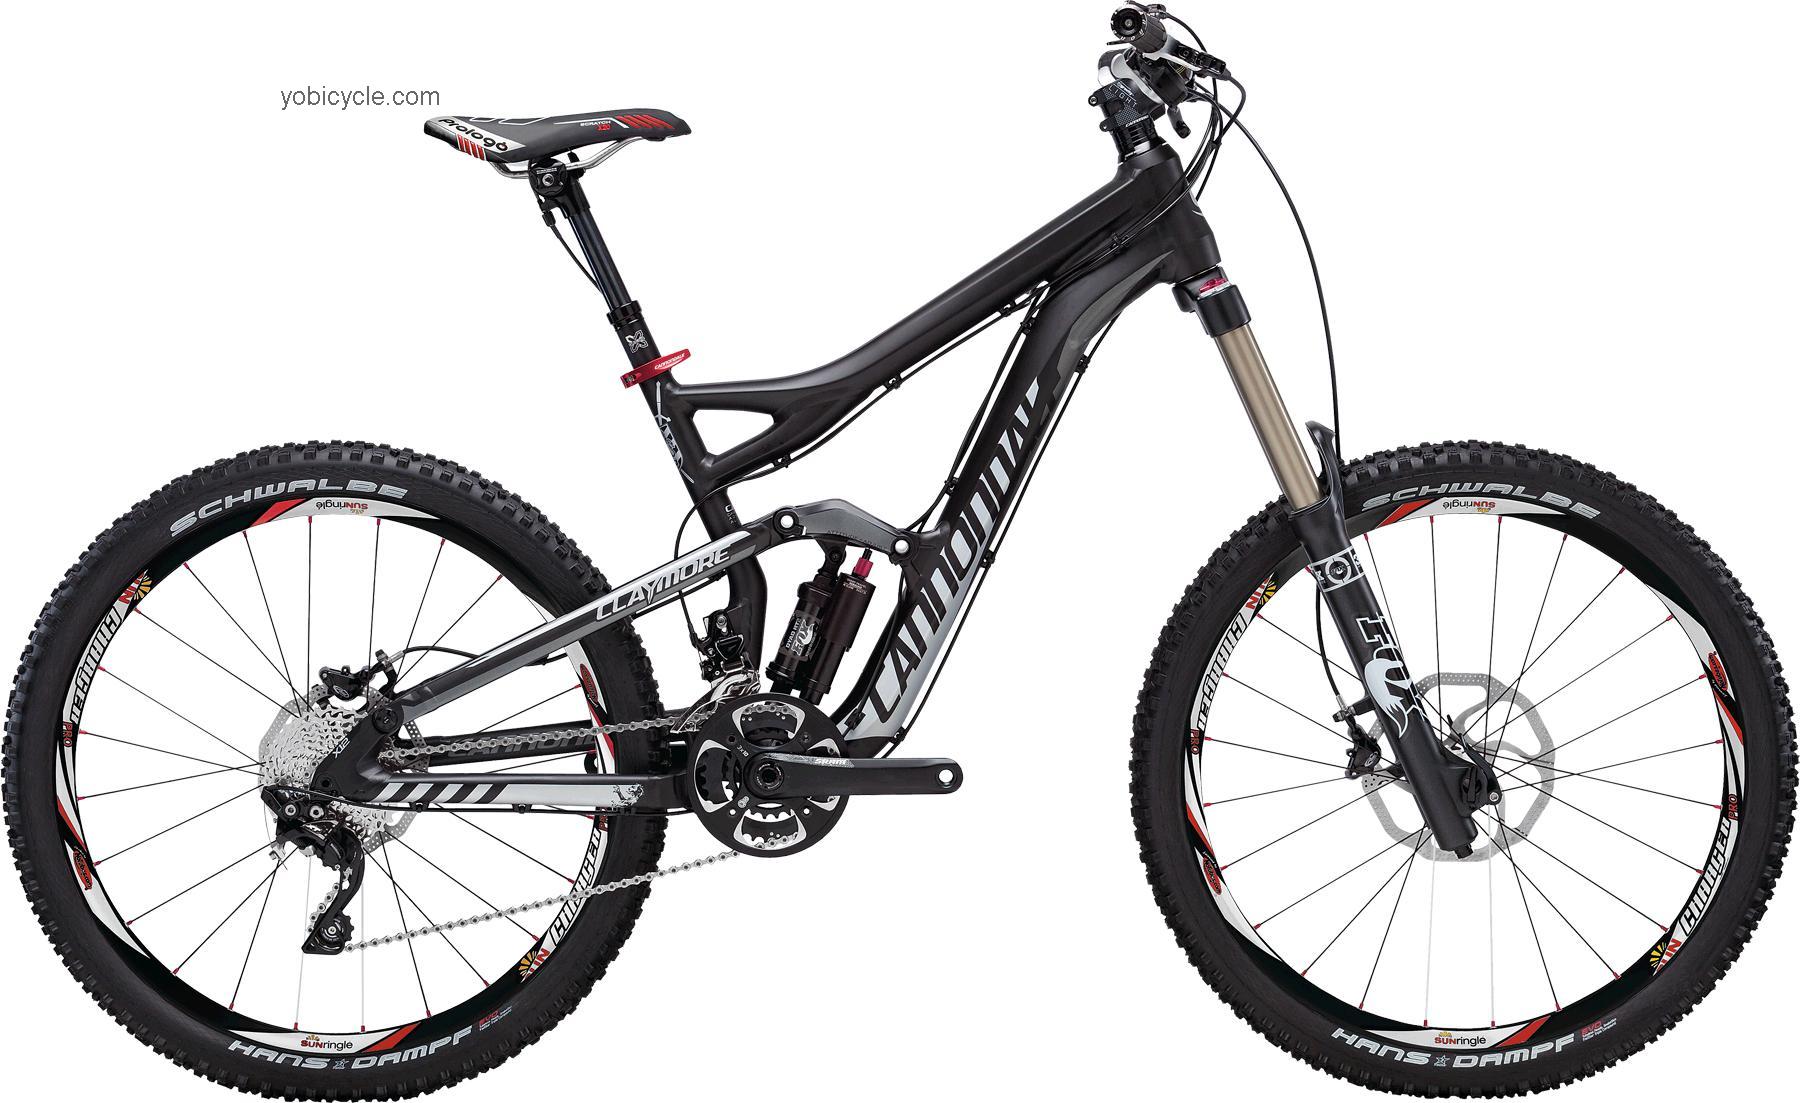 Cannondale Claymore 1 2012 comparison online with competitors